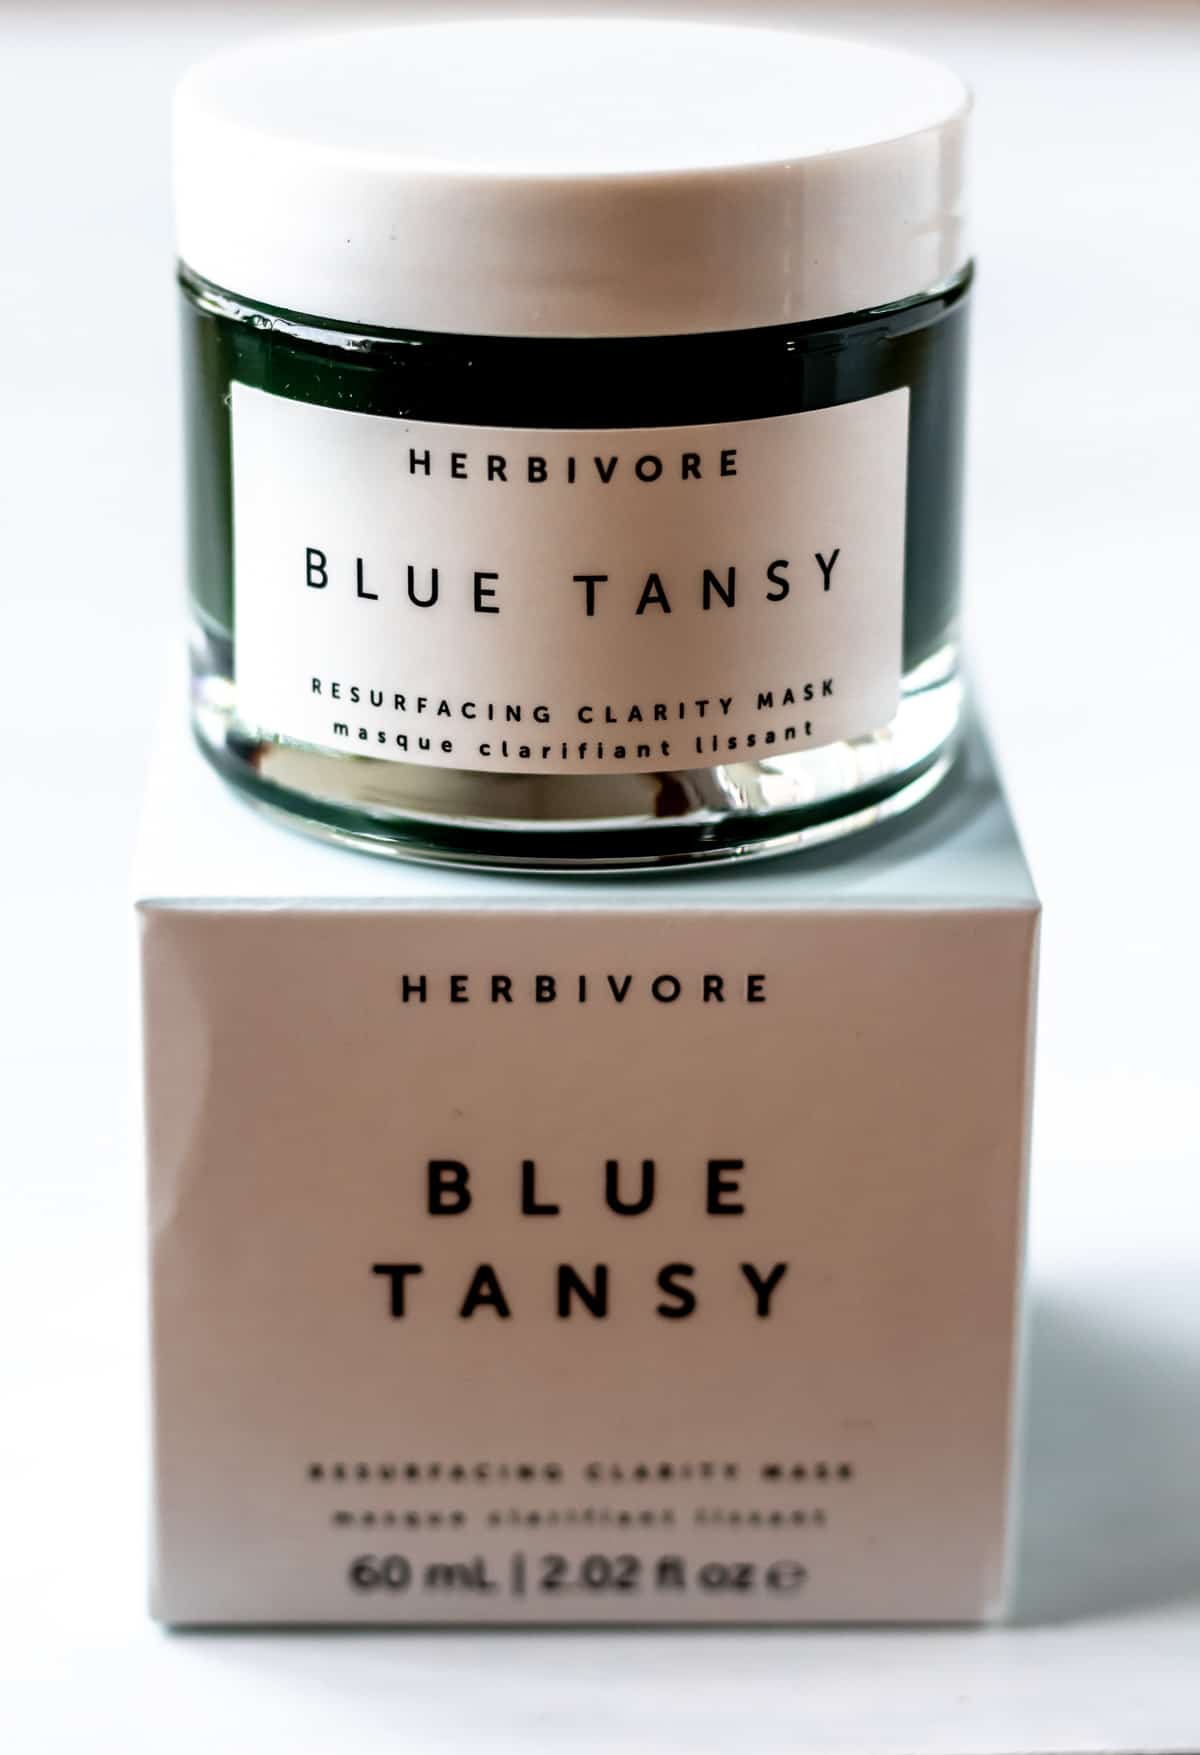 A jar of Herbivore Blue Tansy mask on top of the box that it comes in.